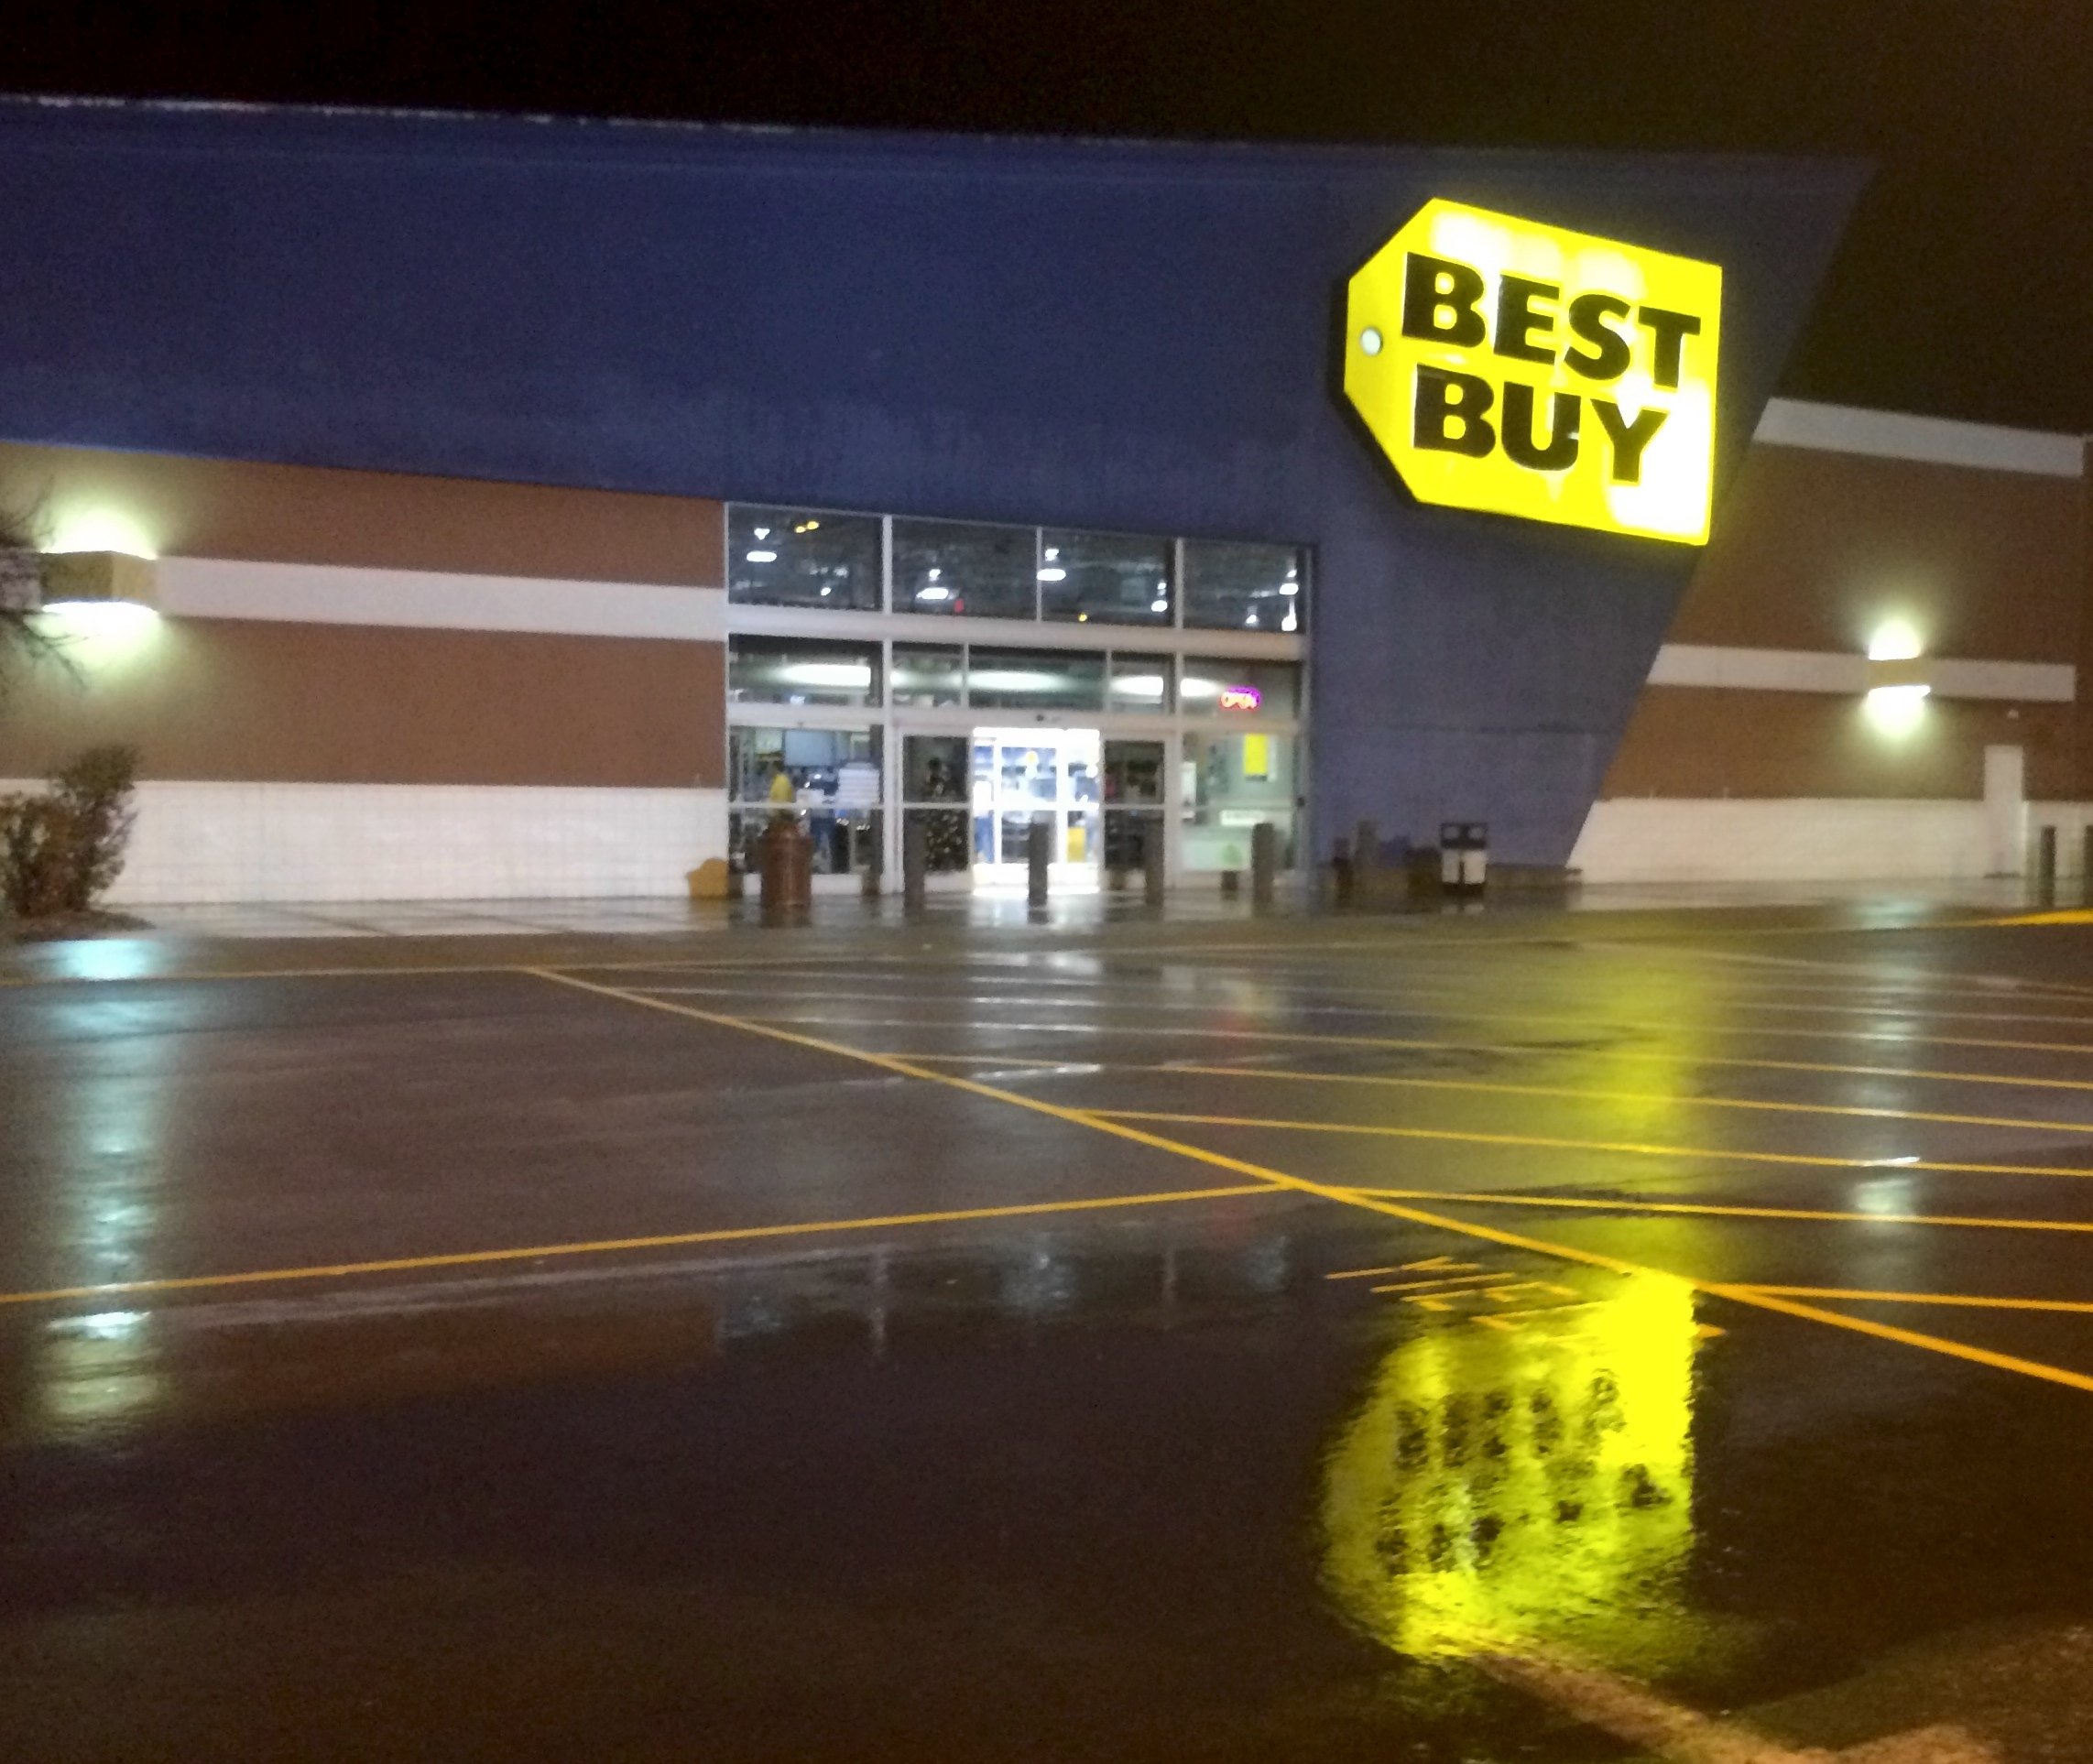 Here are the best Best Buy Black Friday 2013 deals available on Thanksgiving.